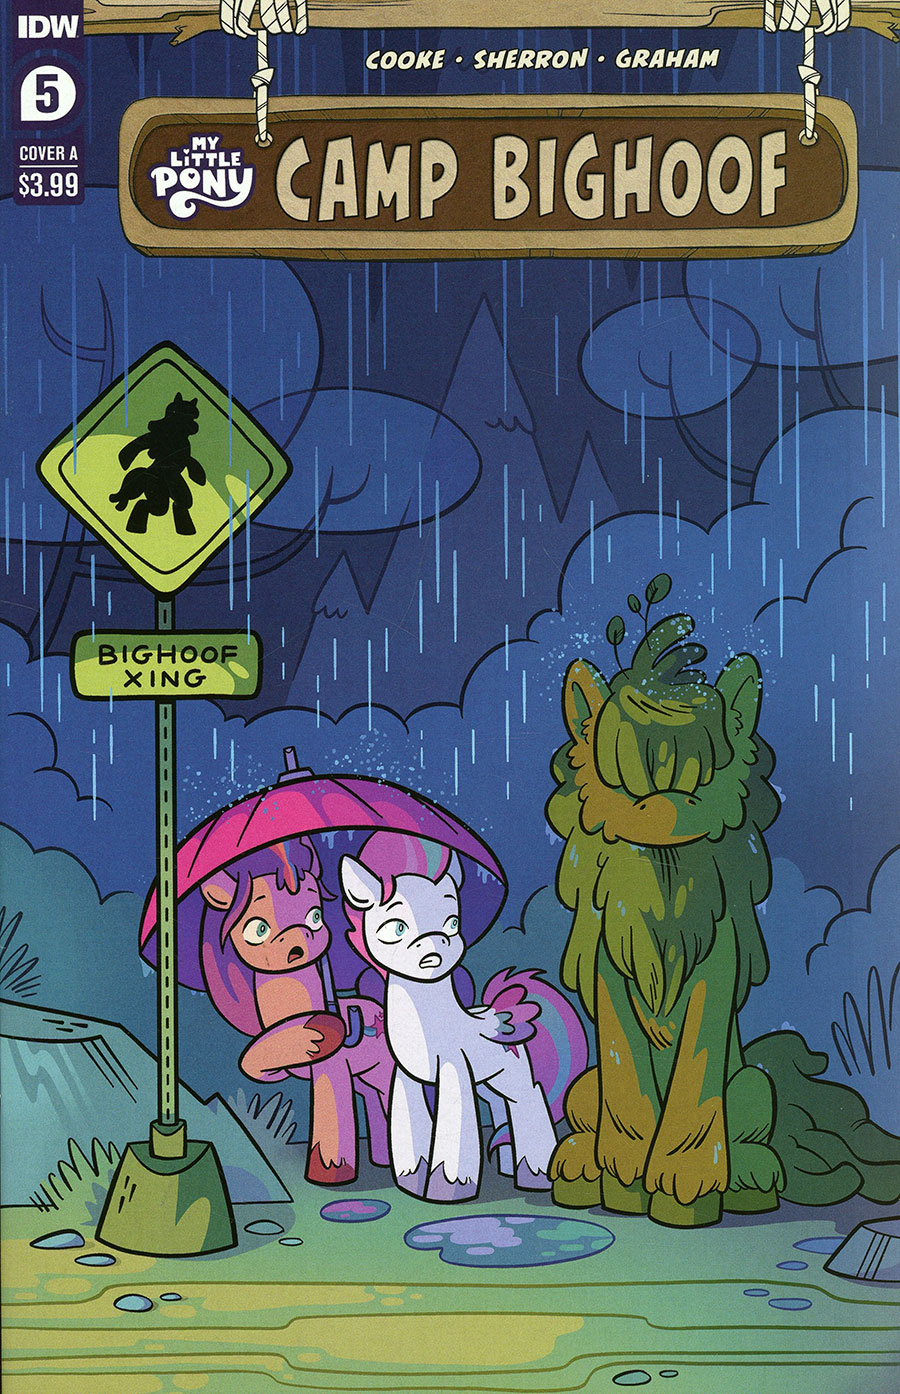 My Little Pony Camp Bighoof #5 Cover A Regular Kate Sherron Cover